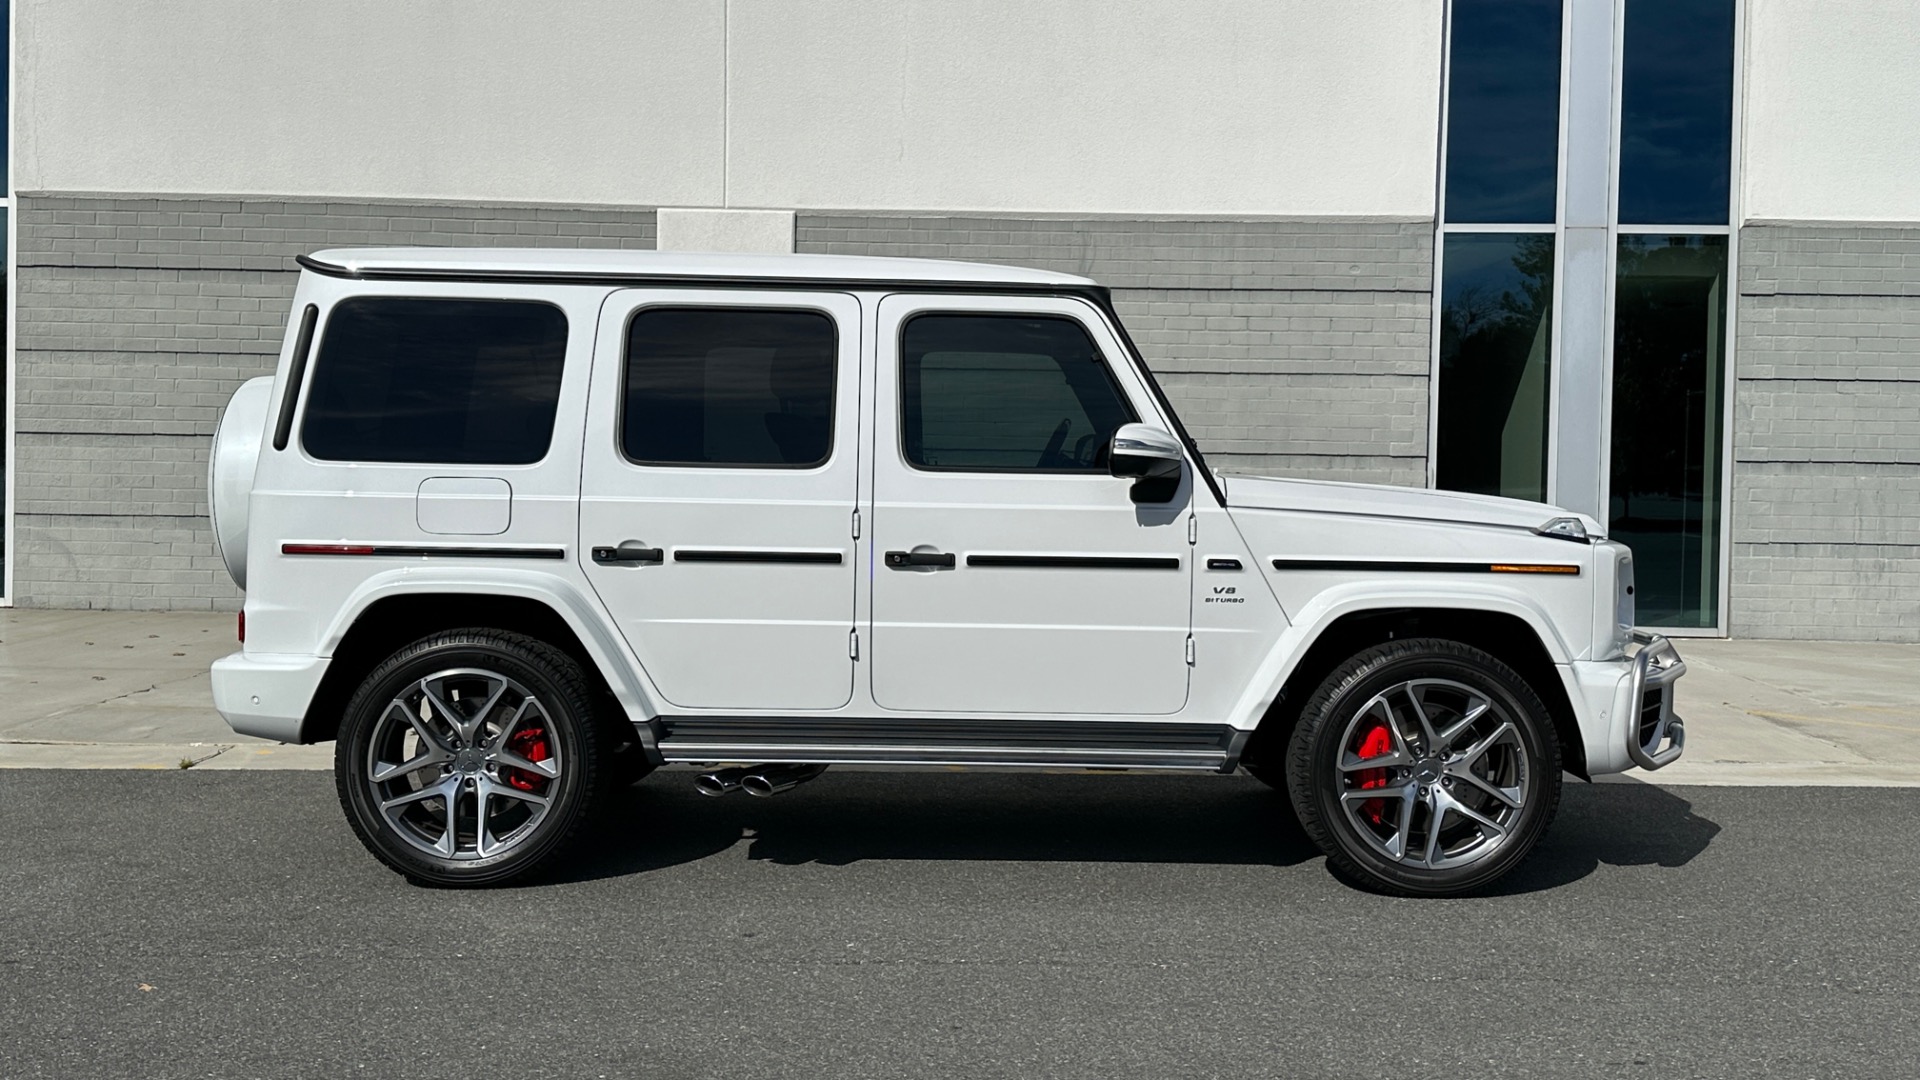 Used 2021 Mercedes-Benz G-Class AMG G63 / AMG EXCLUSIVE INTERIOR / CARBON FIBER / DIAMOND STITCH / 21IN AMG for sale $229,000 at Formula Imports in Charlotte NC 28227 3